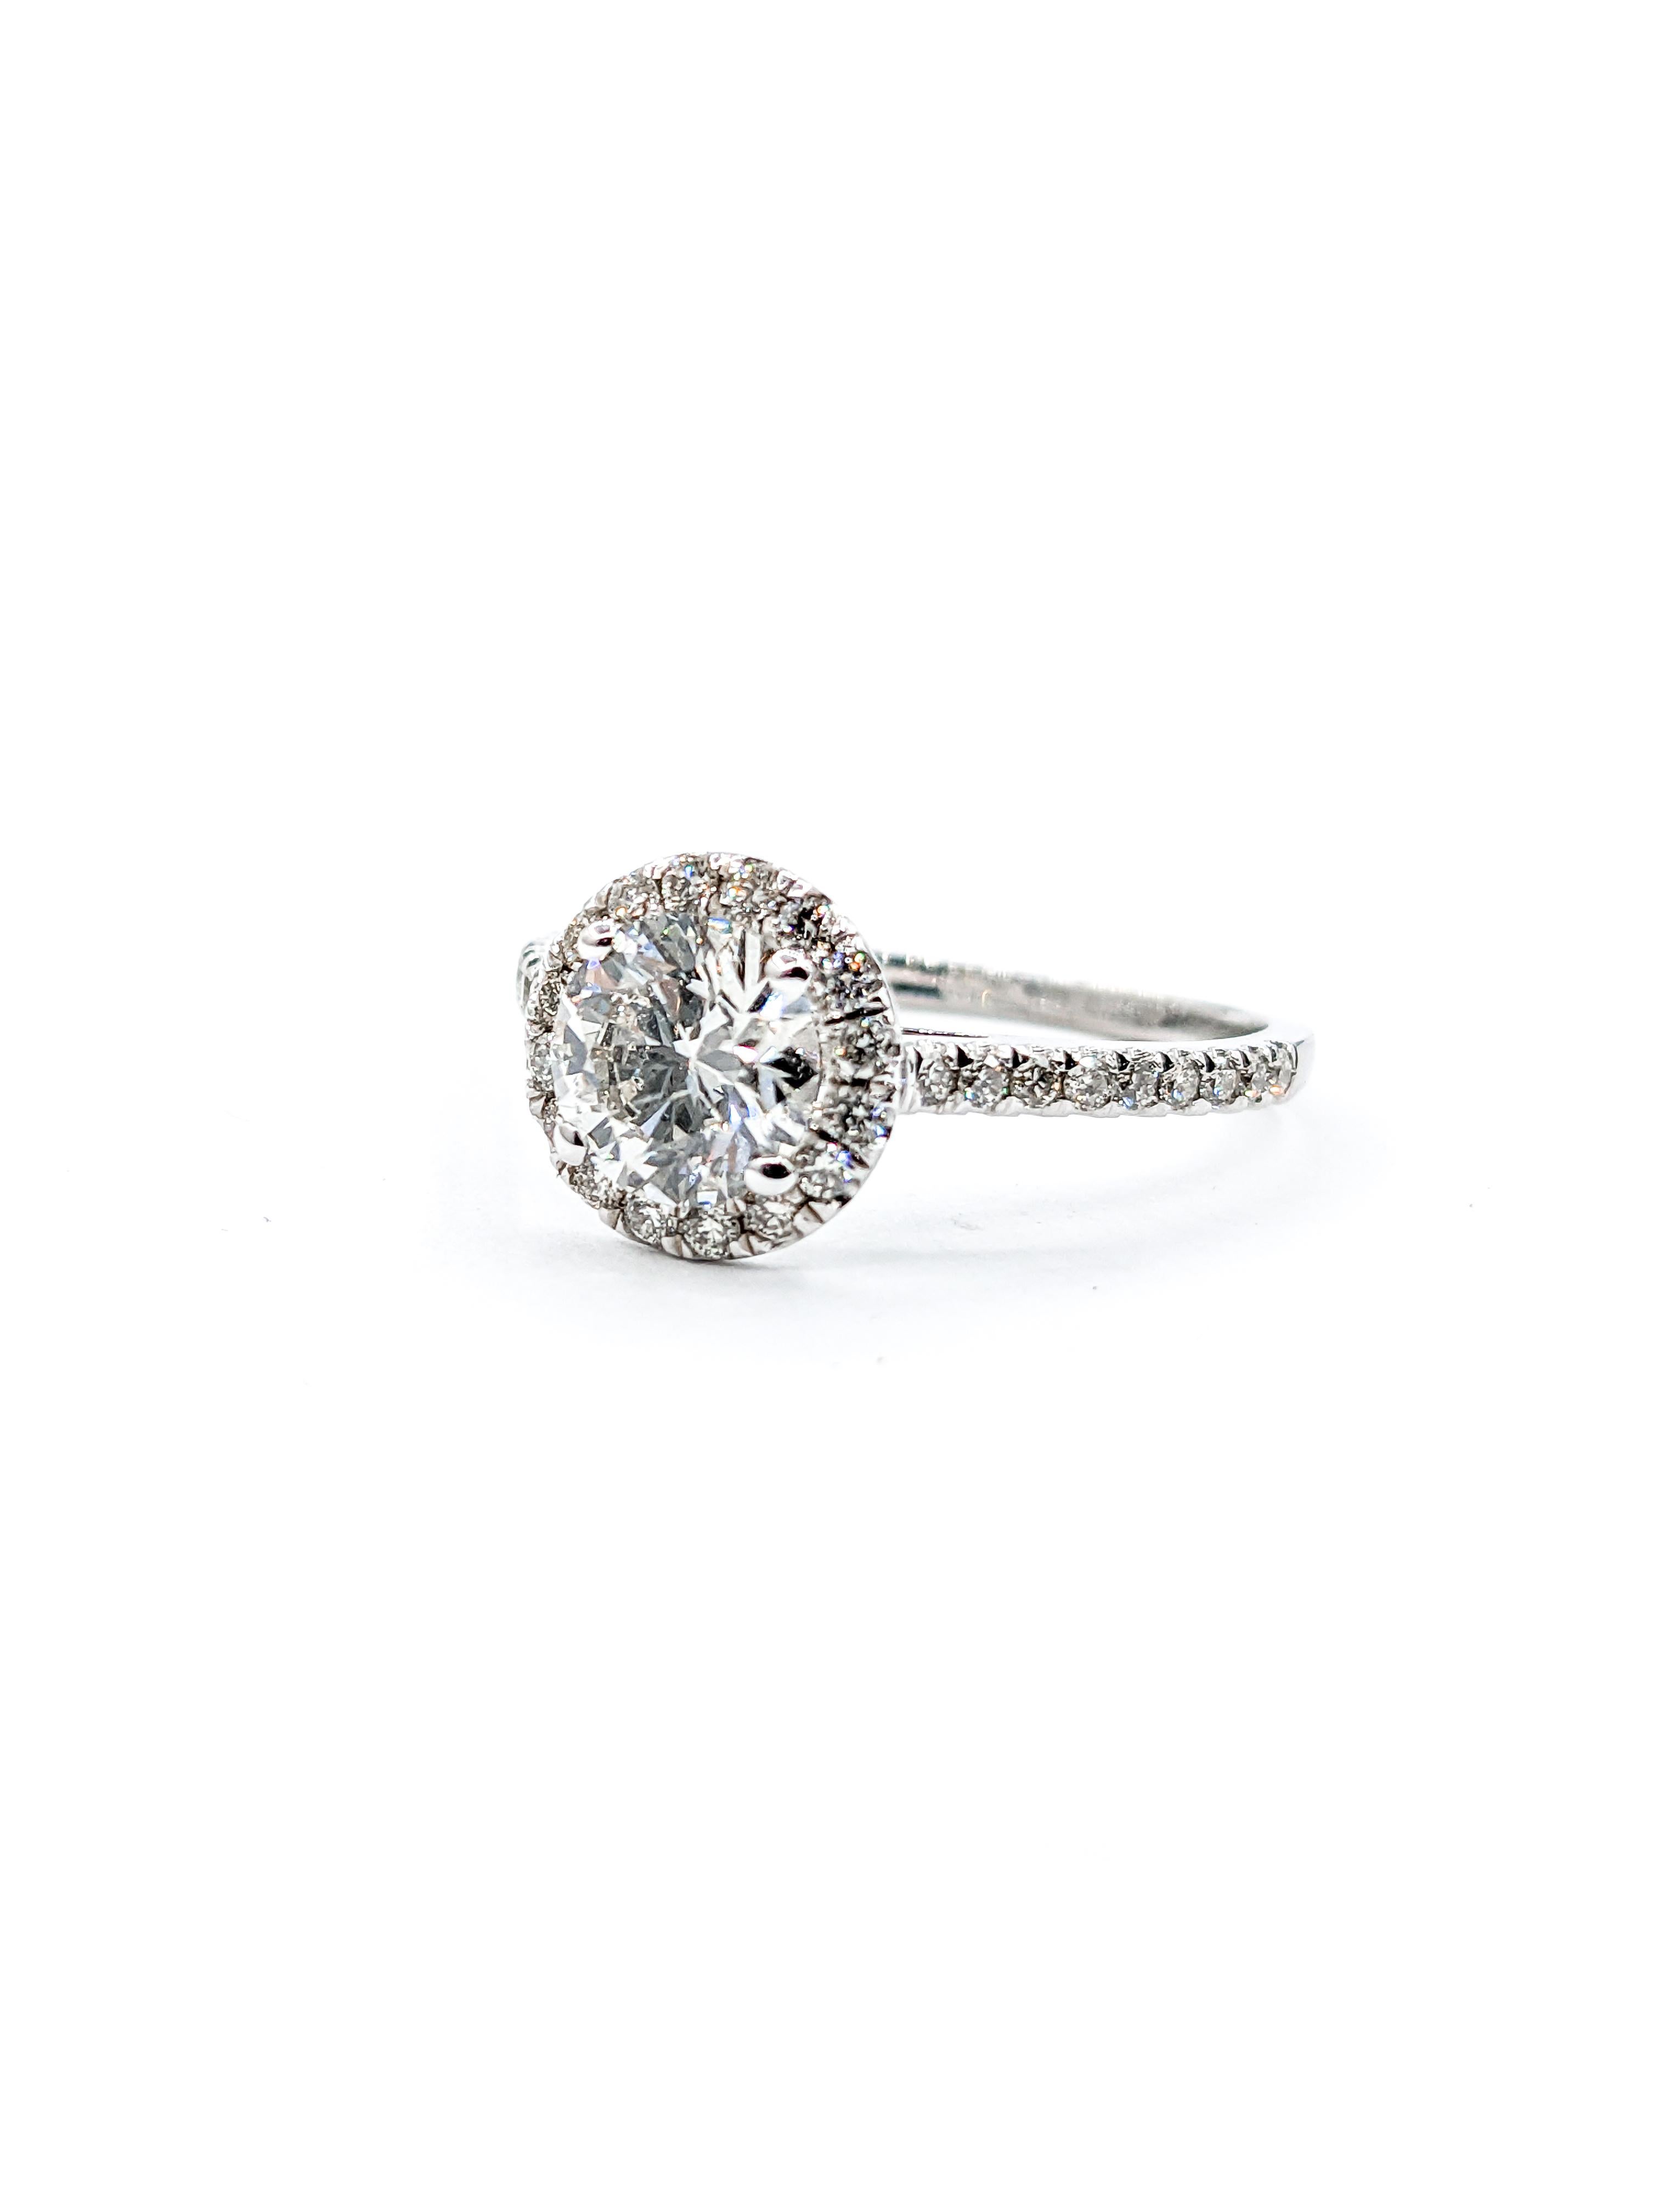 Lab-Created Diamond Halo Engagement Ring in White Gold

Embrace modern elegance with our stunning ring, expertly crafted in 14k white gold. This piece is centered around a dazzling 1.0ct round cut lab-created diamond, known for its SI clarity and